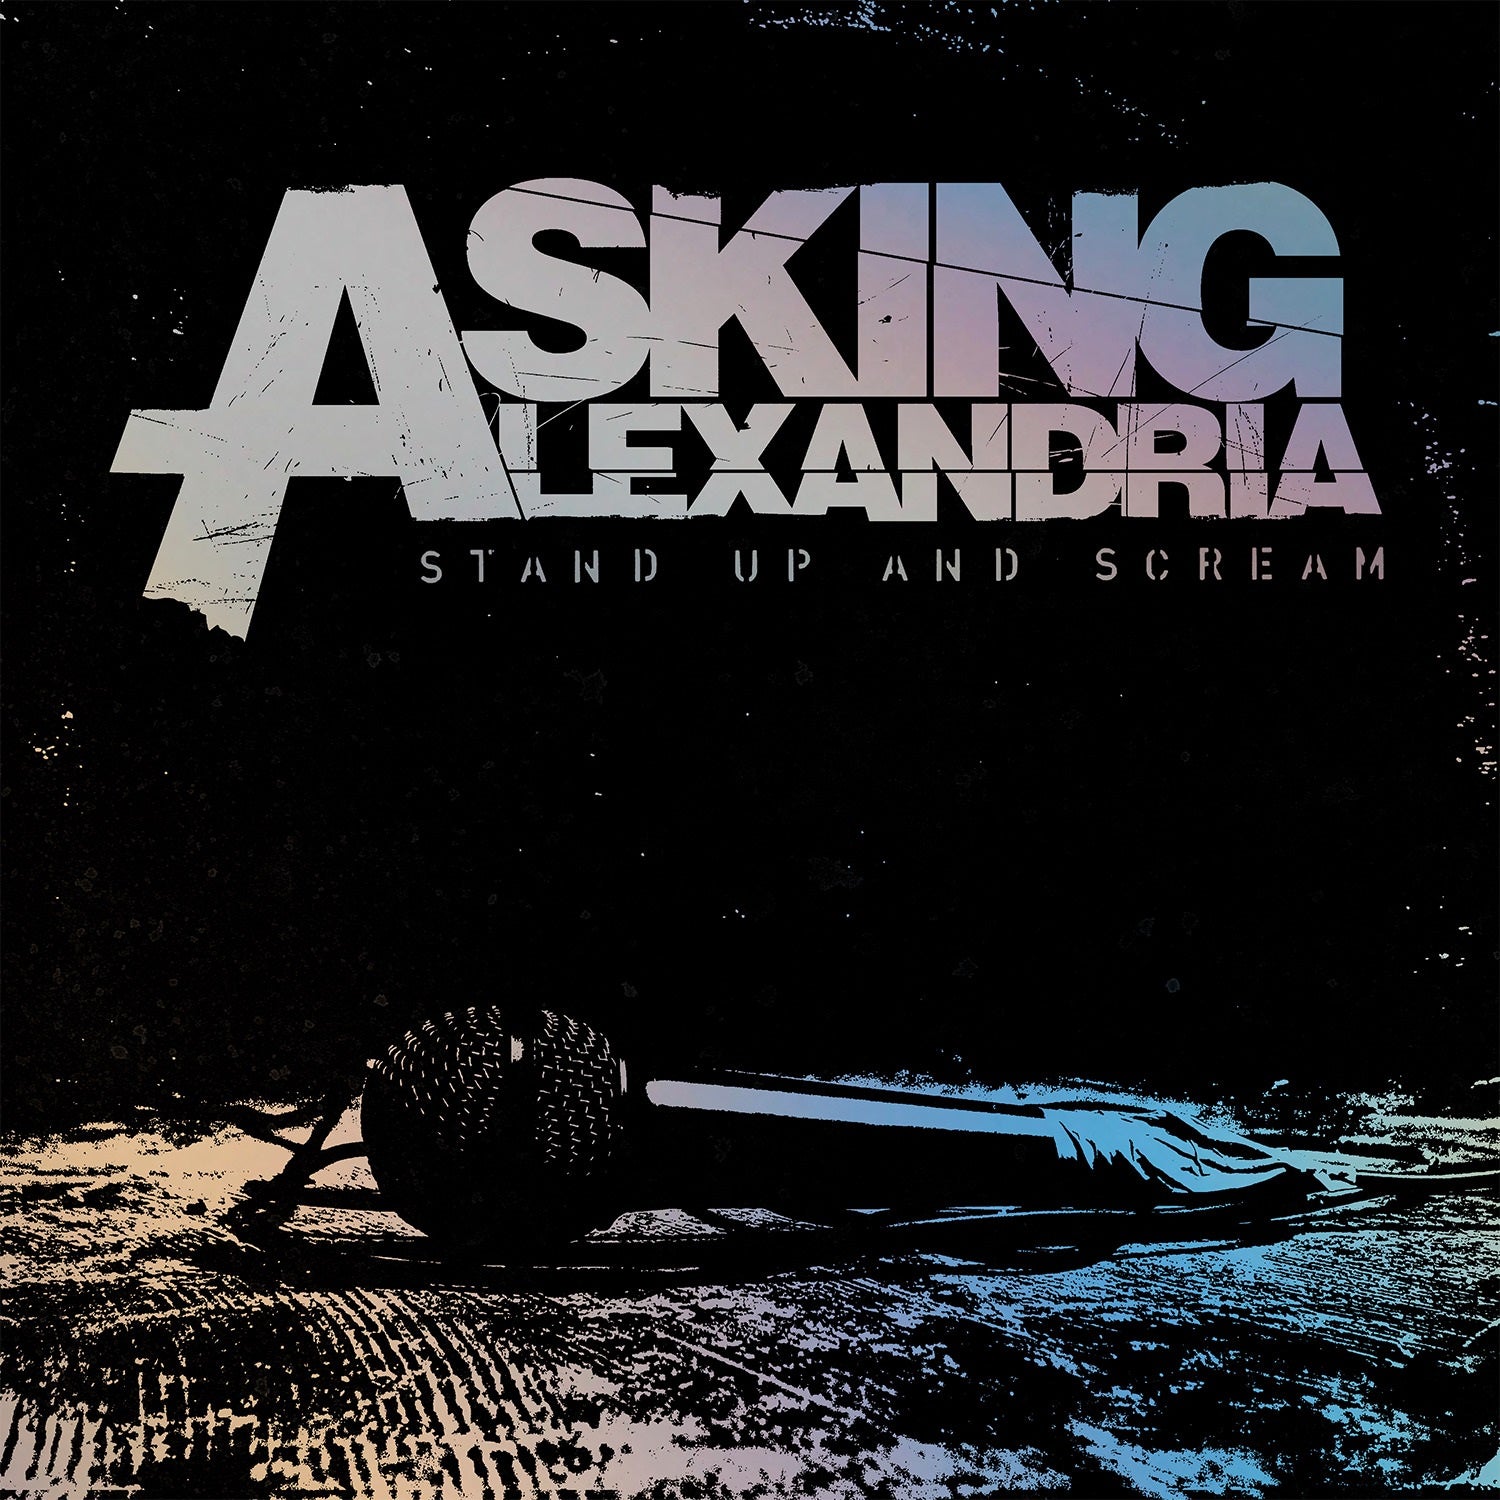 Asking Alexandria ‎– Stand Up And Scream (2009) - New Lp Record Store Day 2020 Sumerian RSD Vinyl - Metalcore